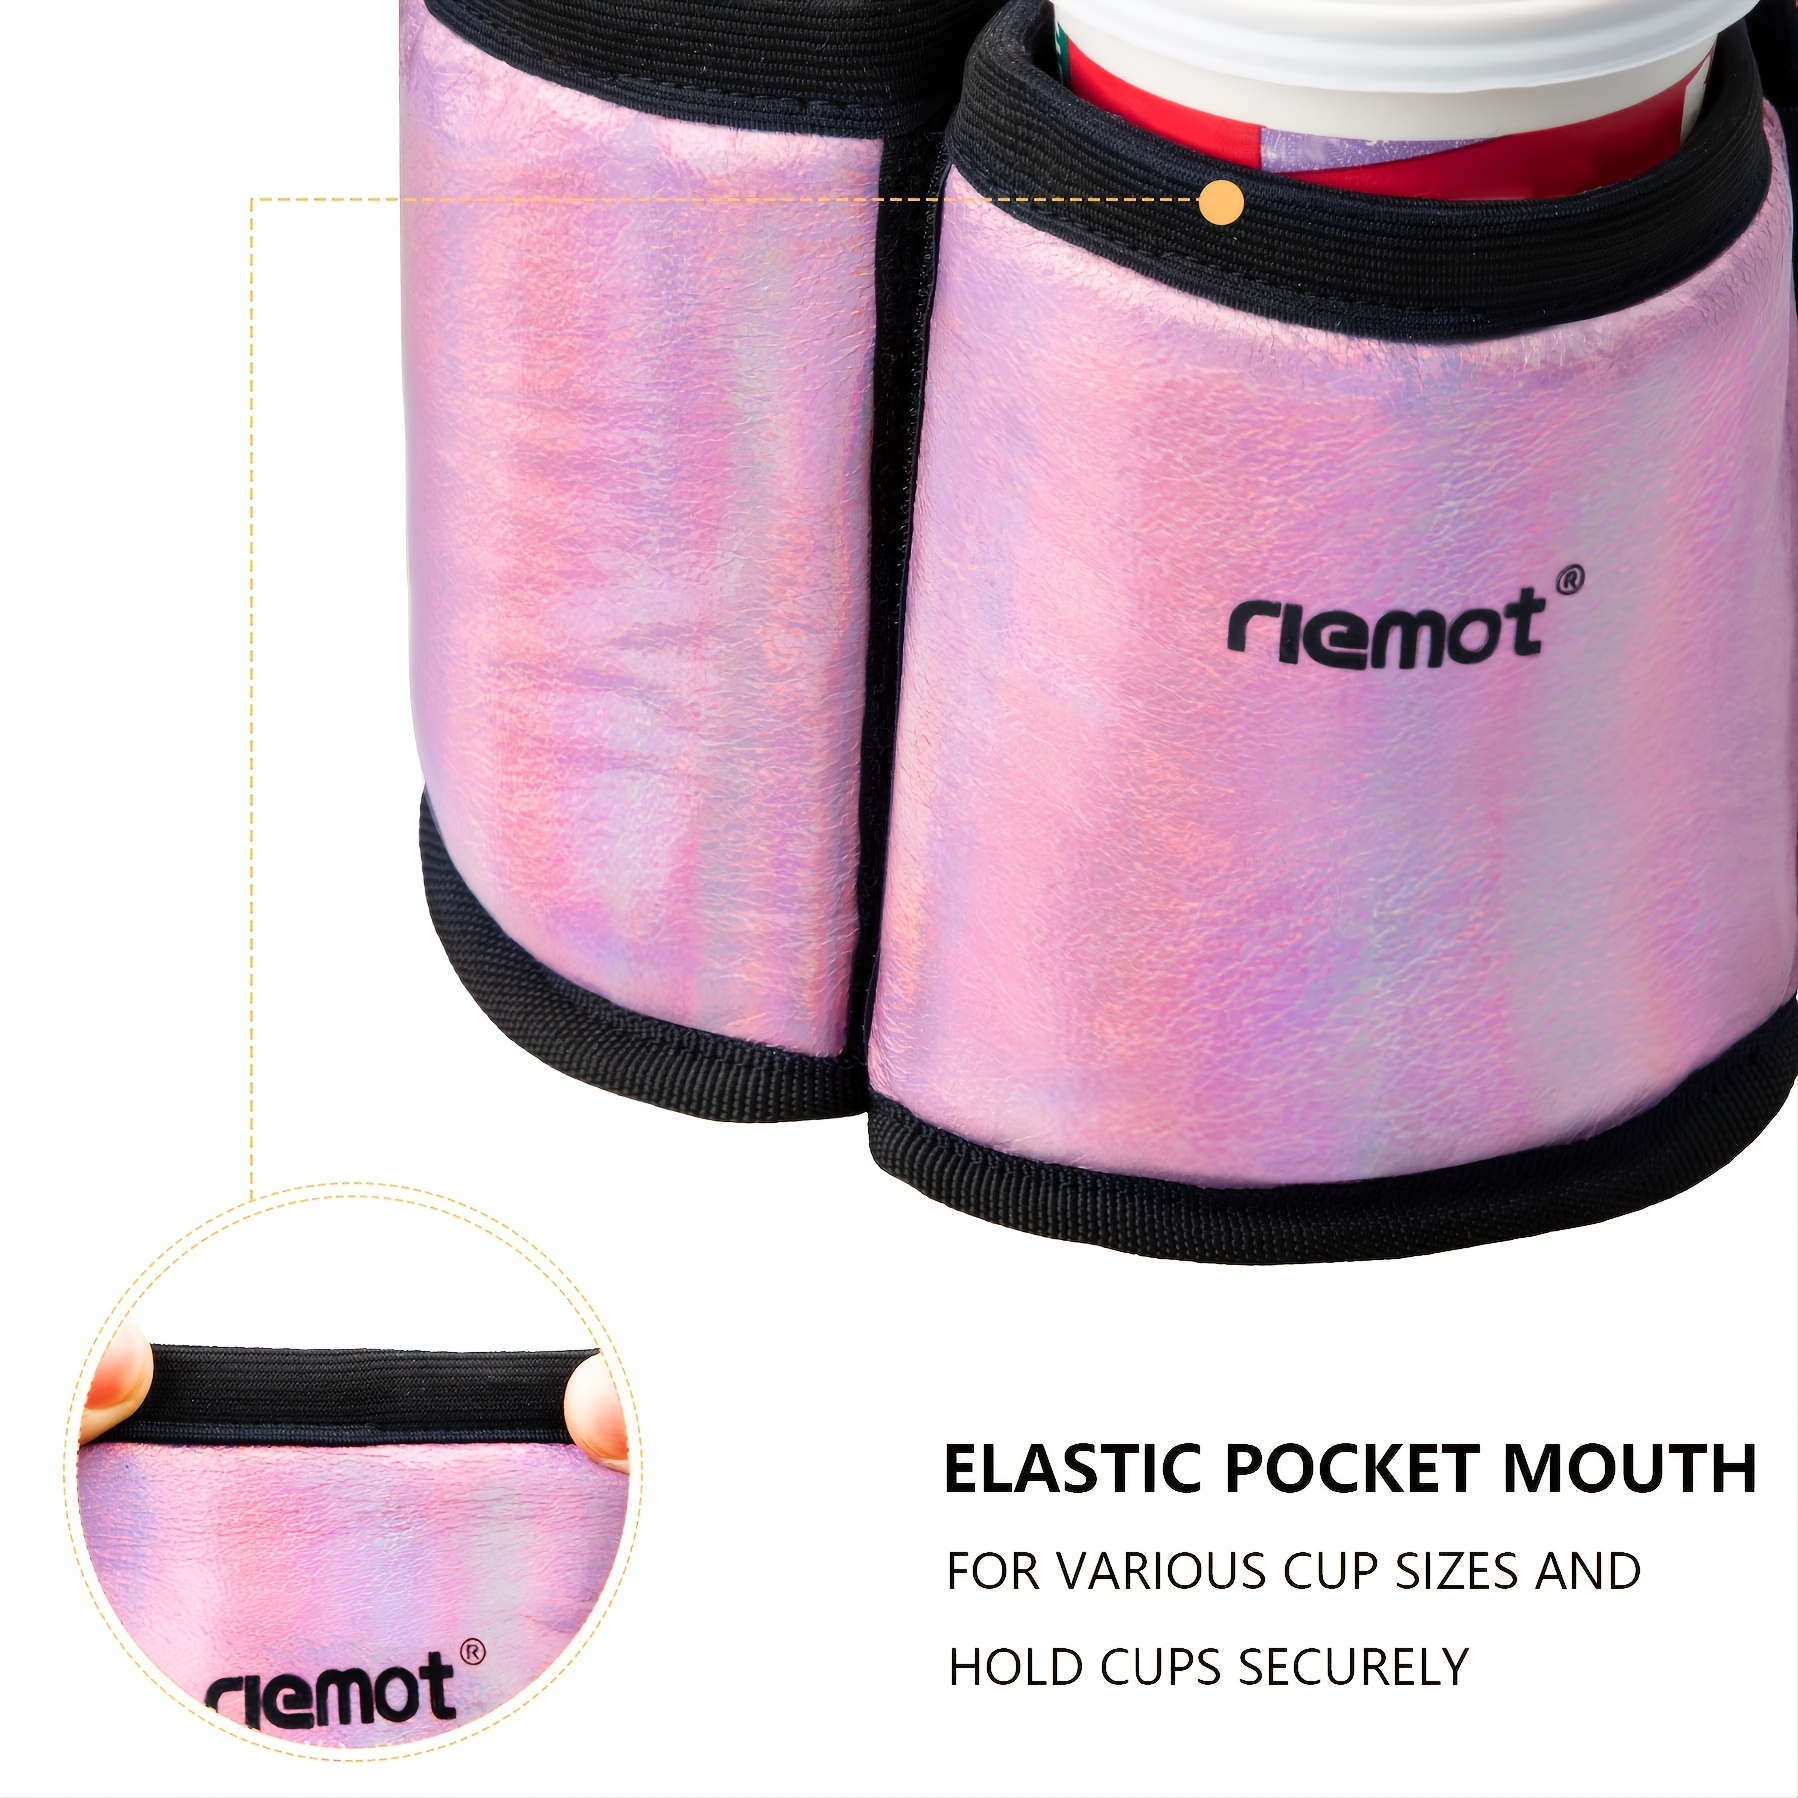  riemot Luggage Travel Cup Holder Free Hand Drink Caddy